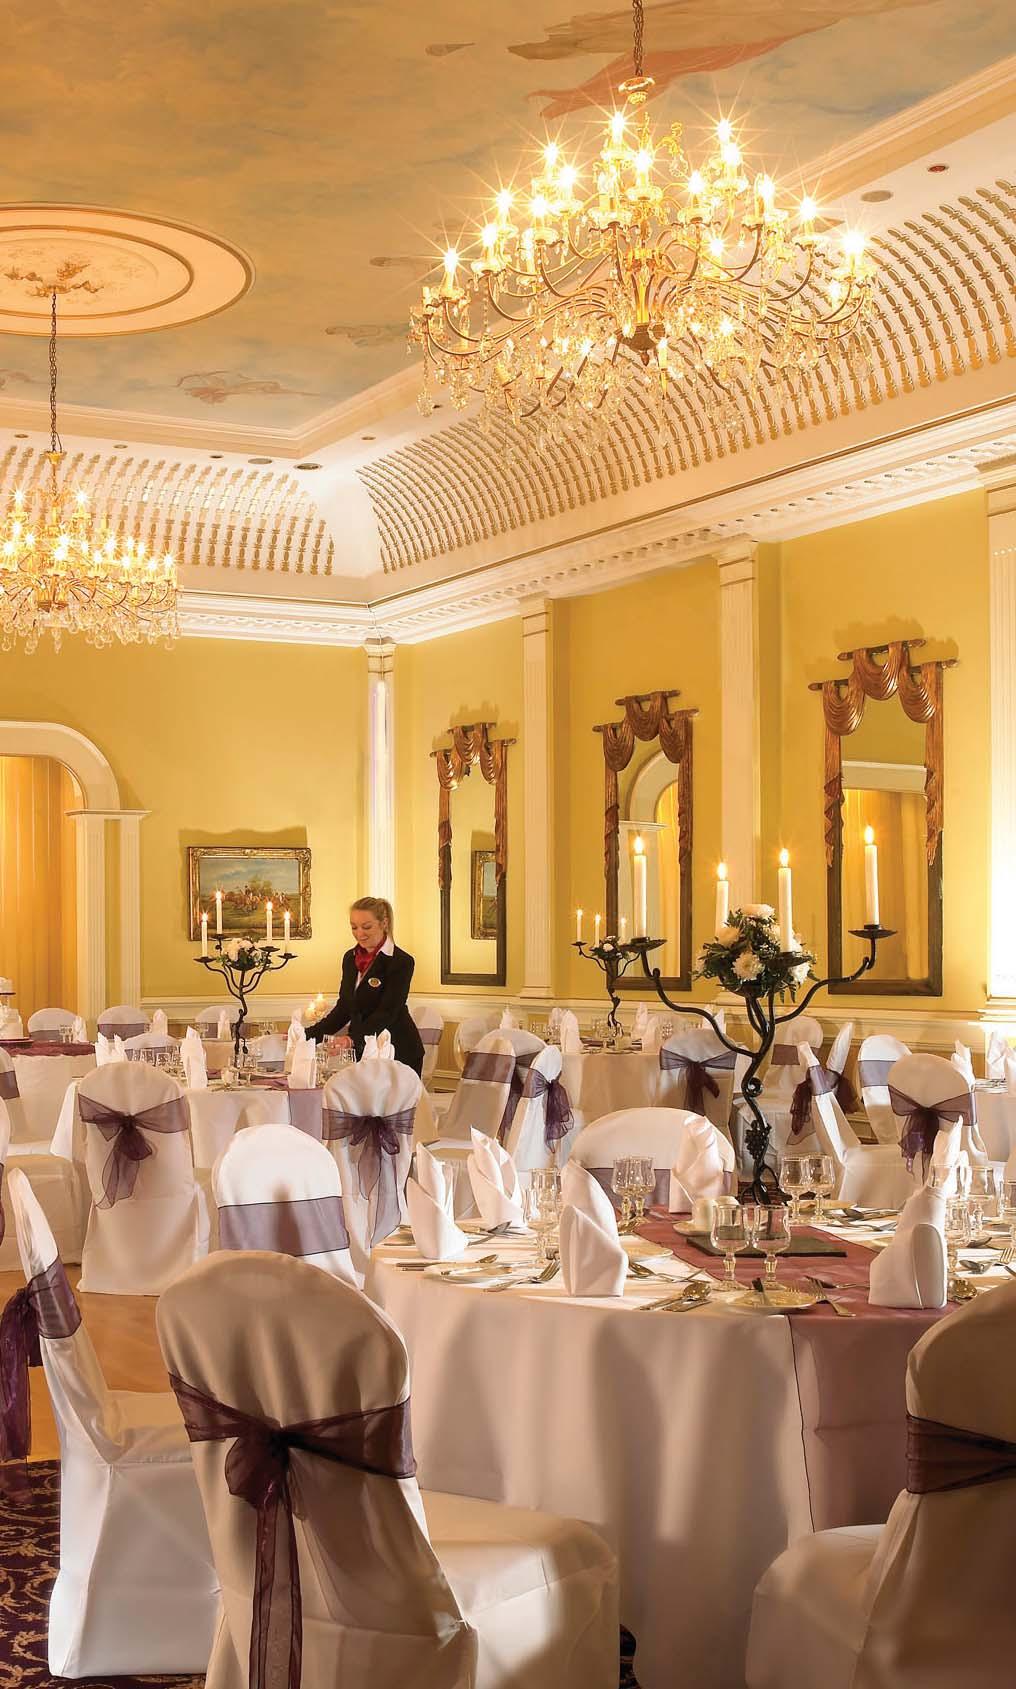 The majestic Millennium Room with its twin chandeliers, bar area & balcony views can seat up to 180 guests.